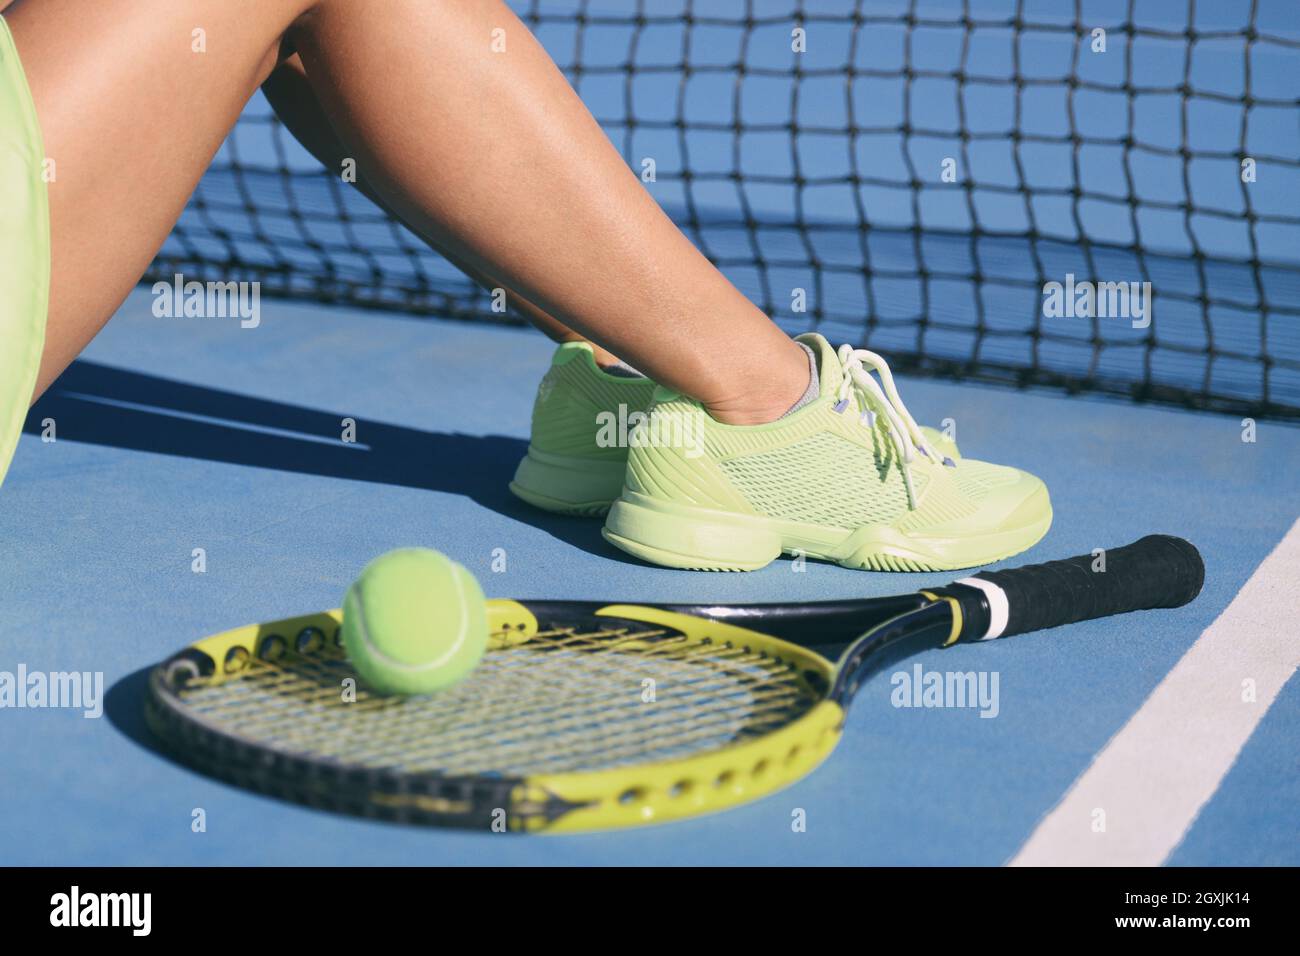 Tennis athlete player woman legs and feet wearing tennis shoes trainers. Fashion yellow activewear outfit on blue outdoor hard court. Closeup of legs Stock Photo